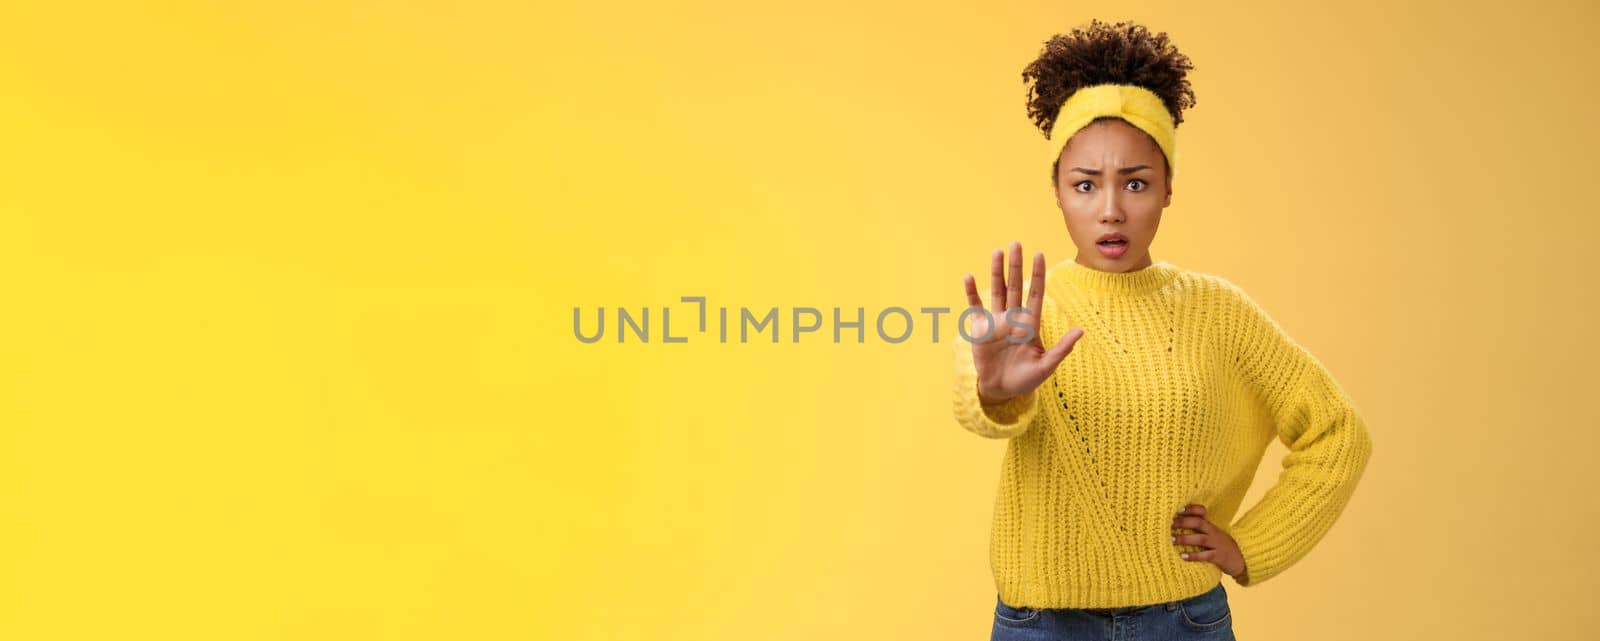 Afraid shocked insecure woman trying show voice be brave extend arm enough stop refusal gesture look frightened insecure unconfident rejecting declining offensive proposal, yellow background.